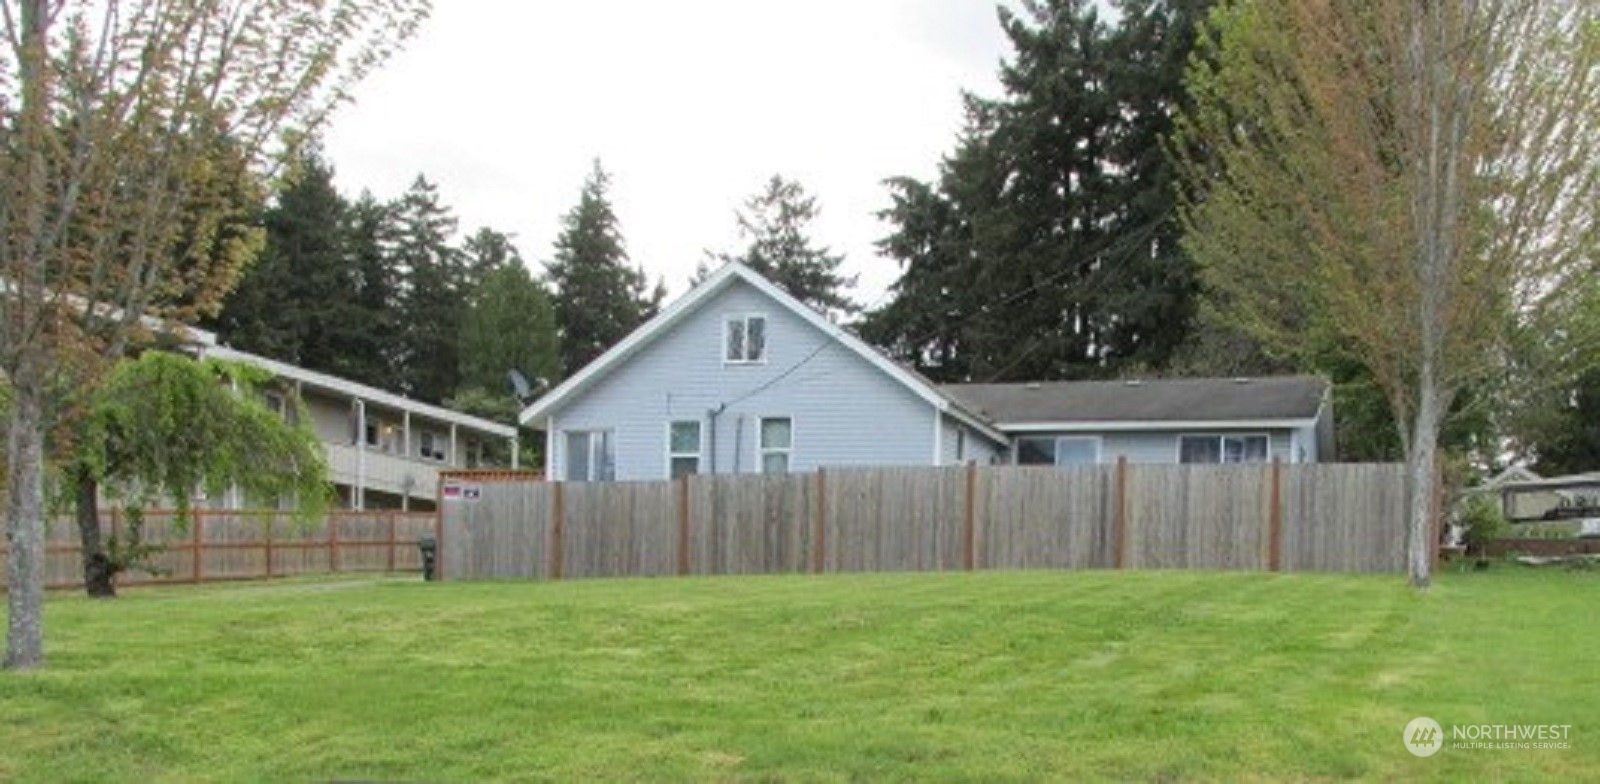 a view of a house with a yard and a wooden deck